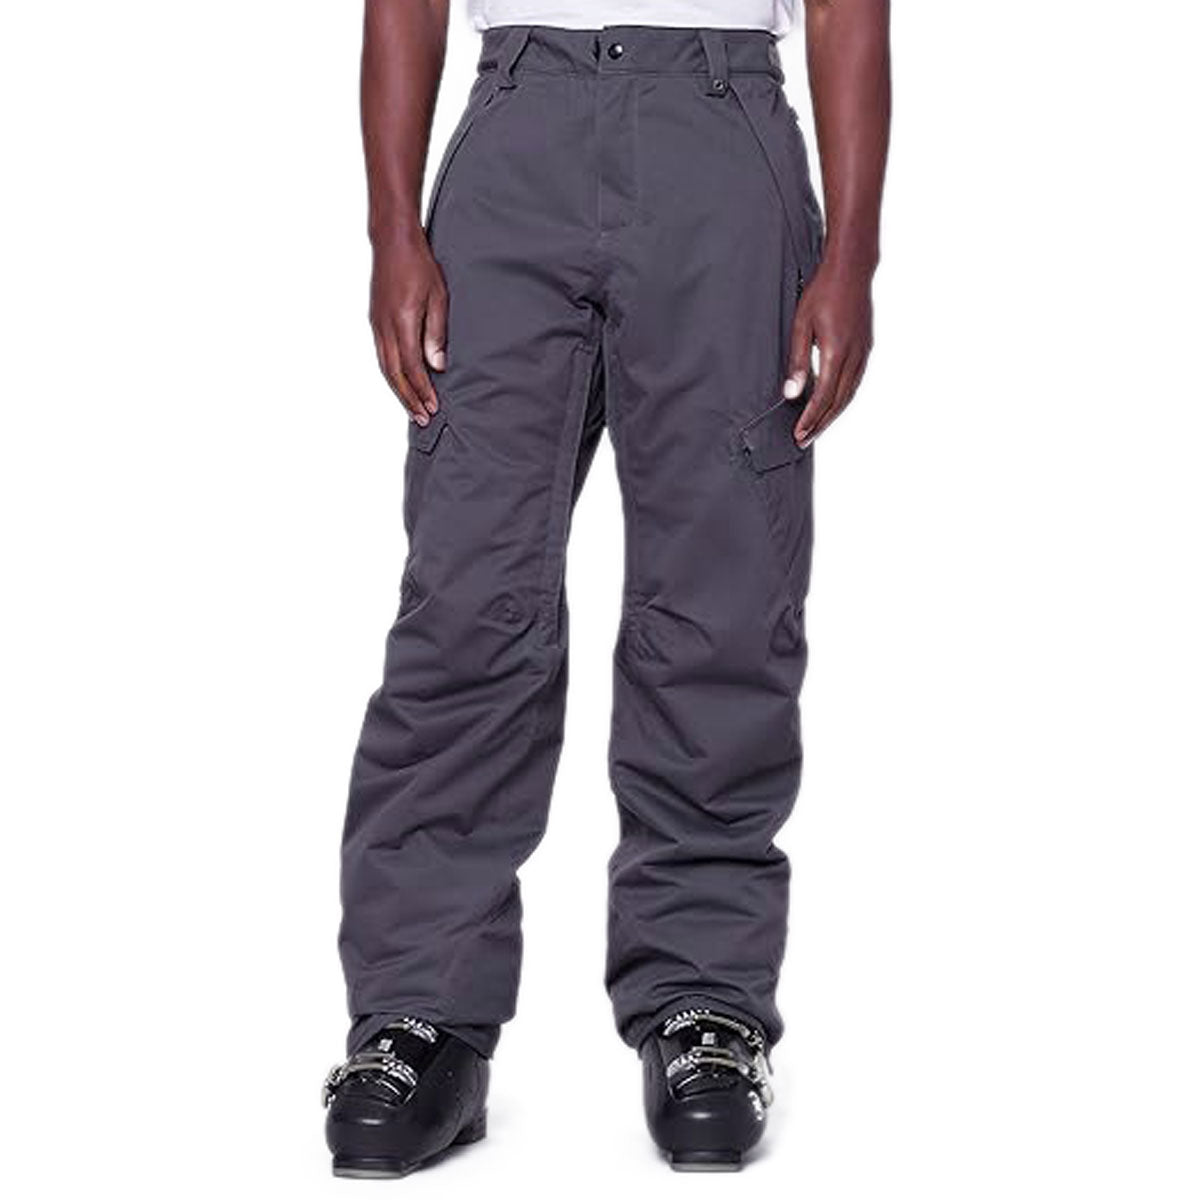 686 Infinity Insl Cargo Snowboard Pants - Charcoal image 5